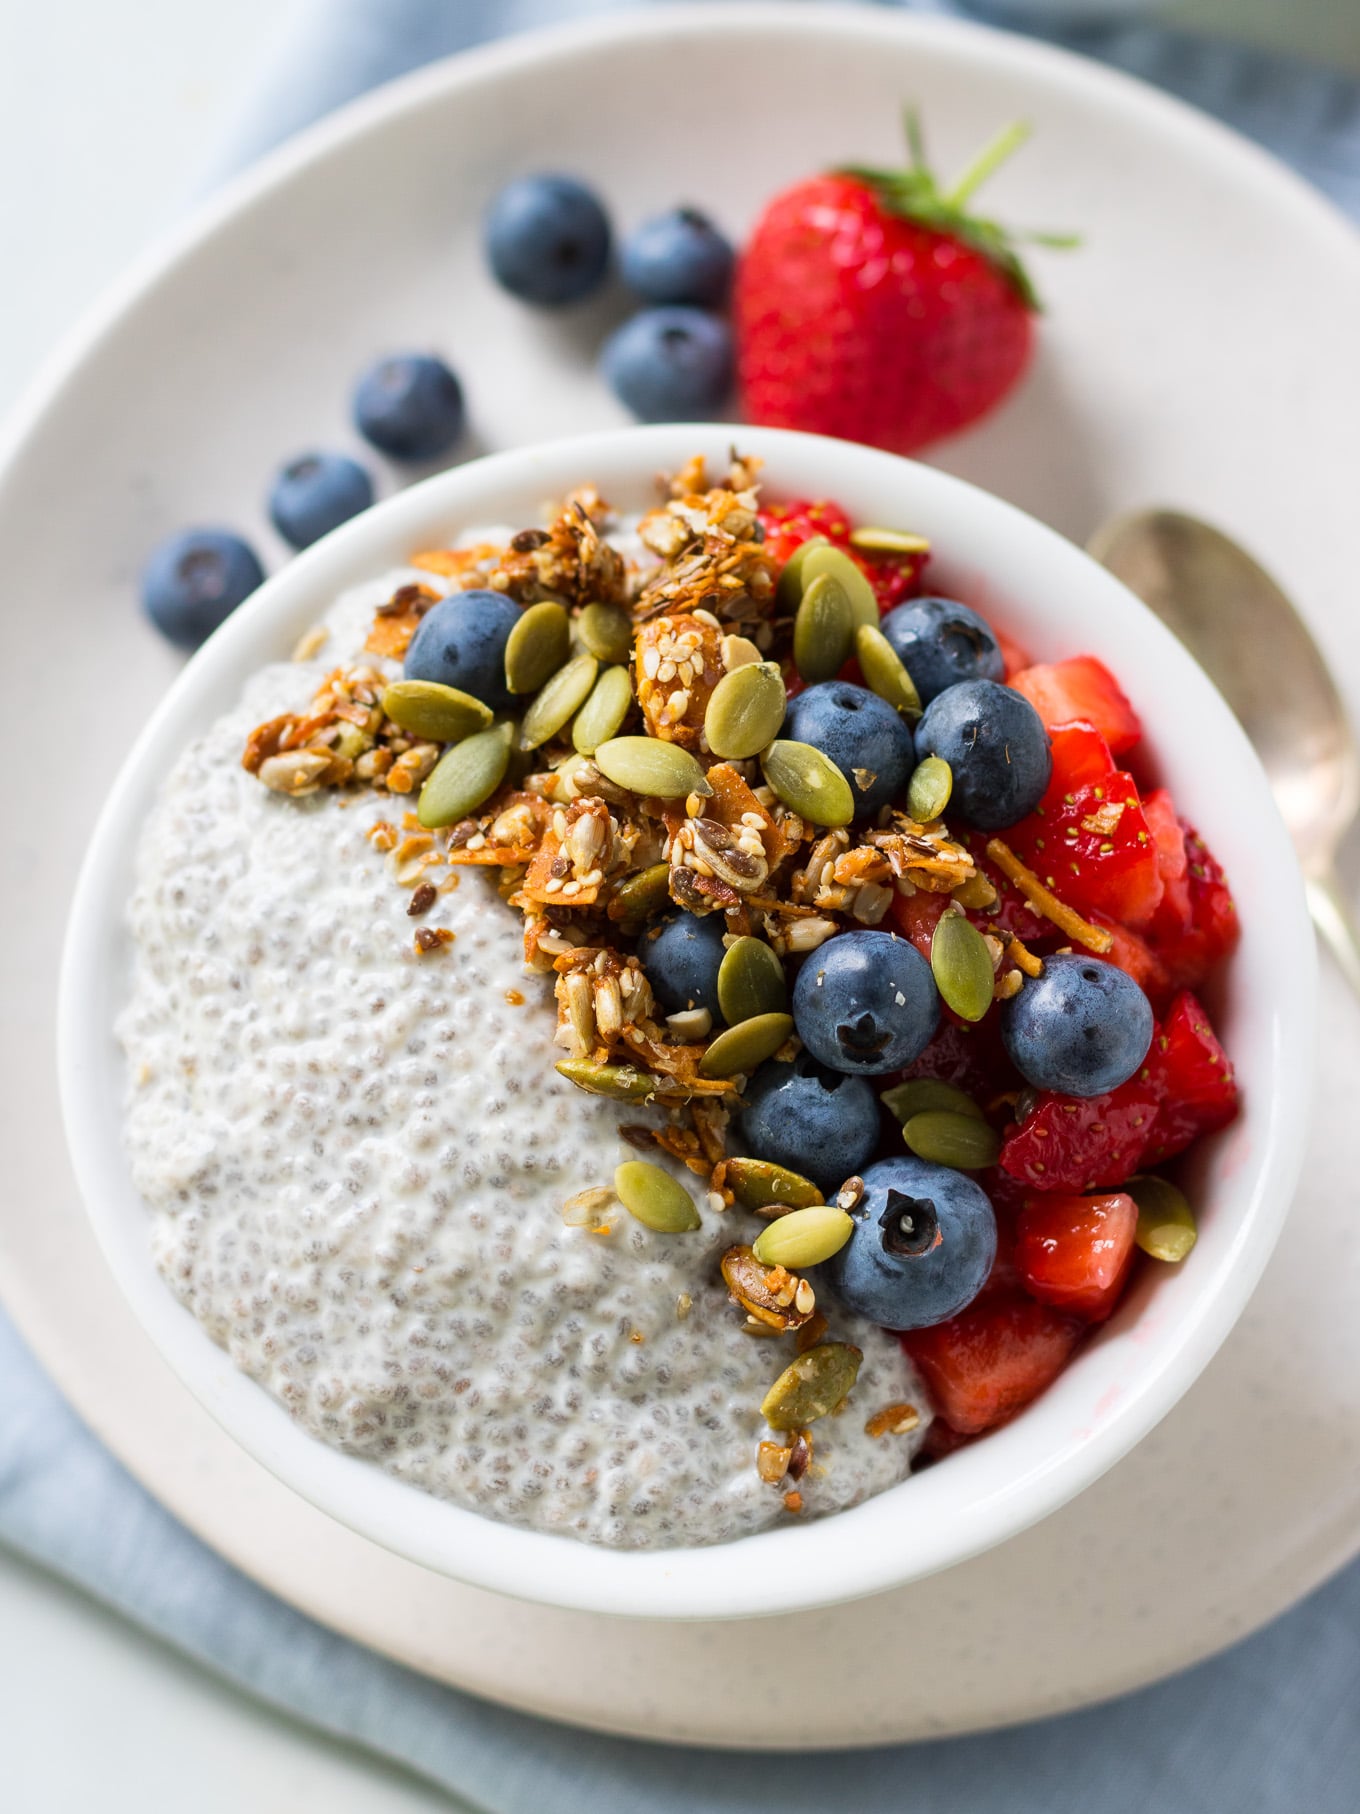 Vanilla Chia Pudding made with coconut milk, vanilla and maple syrup. Serve with fruit and granola for a #healthy breakfast! #chiapudding #dairyfree #breakfast